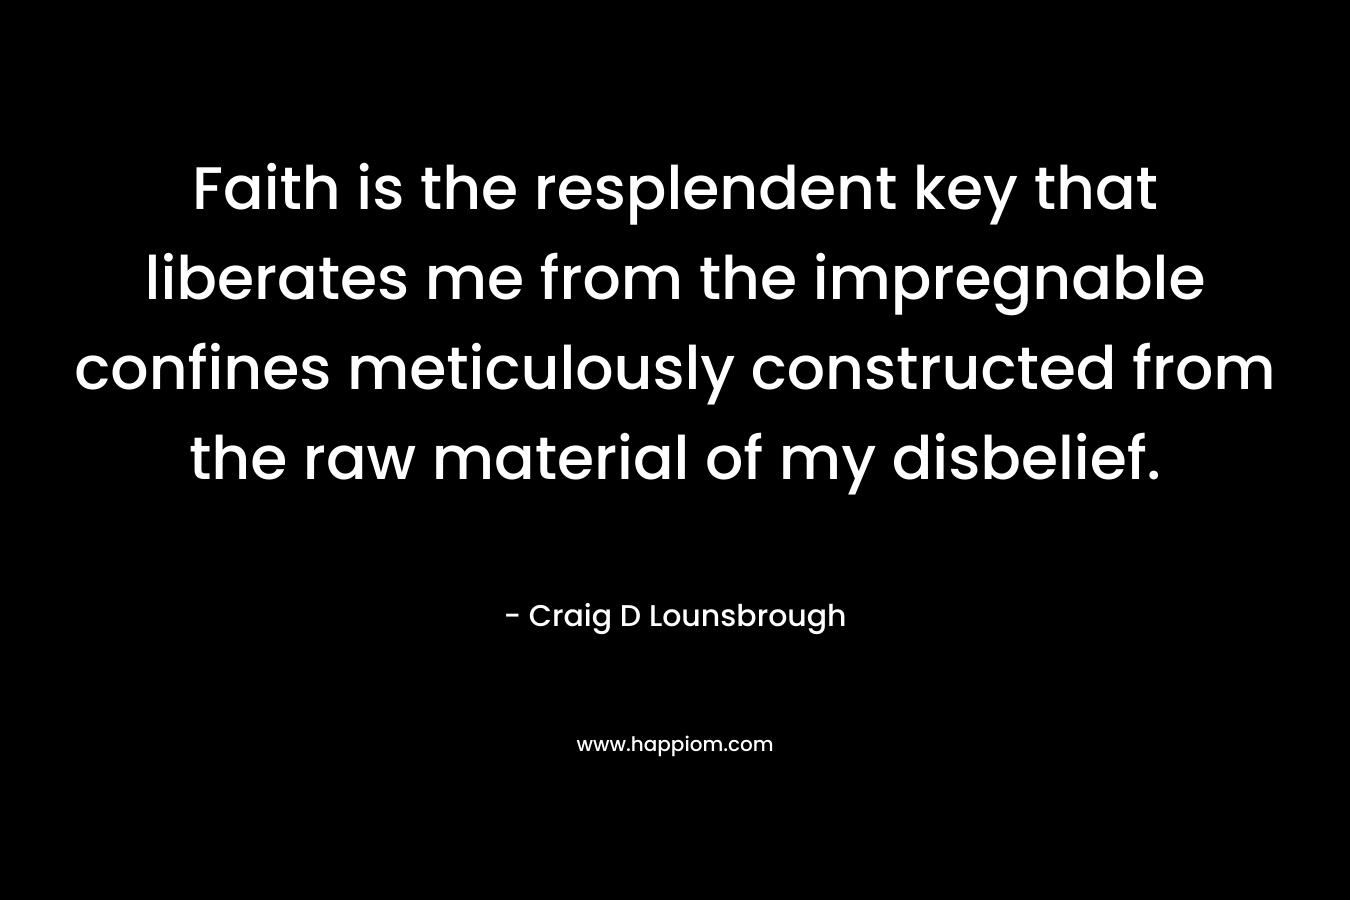 Faith is the resplendent key that liberates me from the impregnable confines meticulously constructed from the raw material of my disbelief.